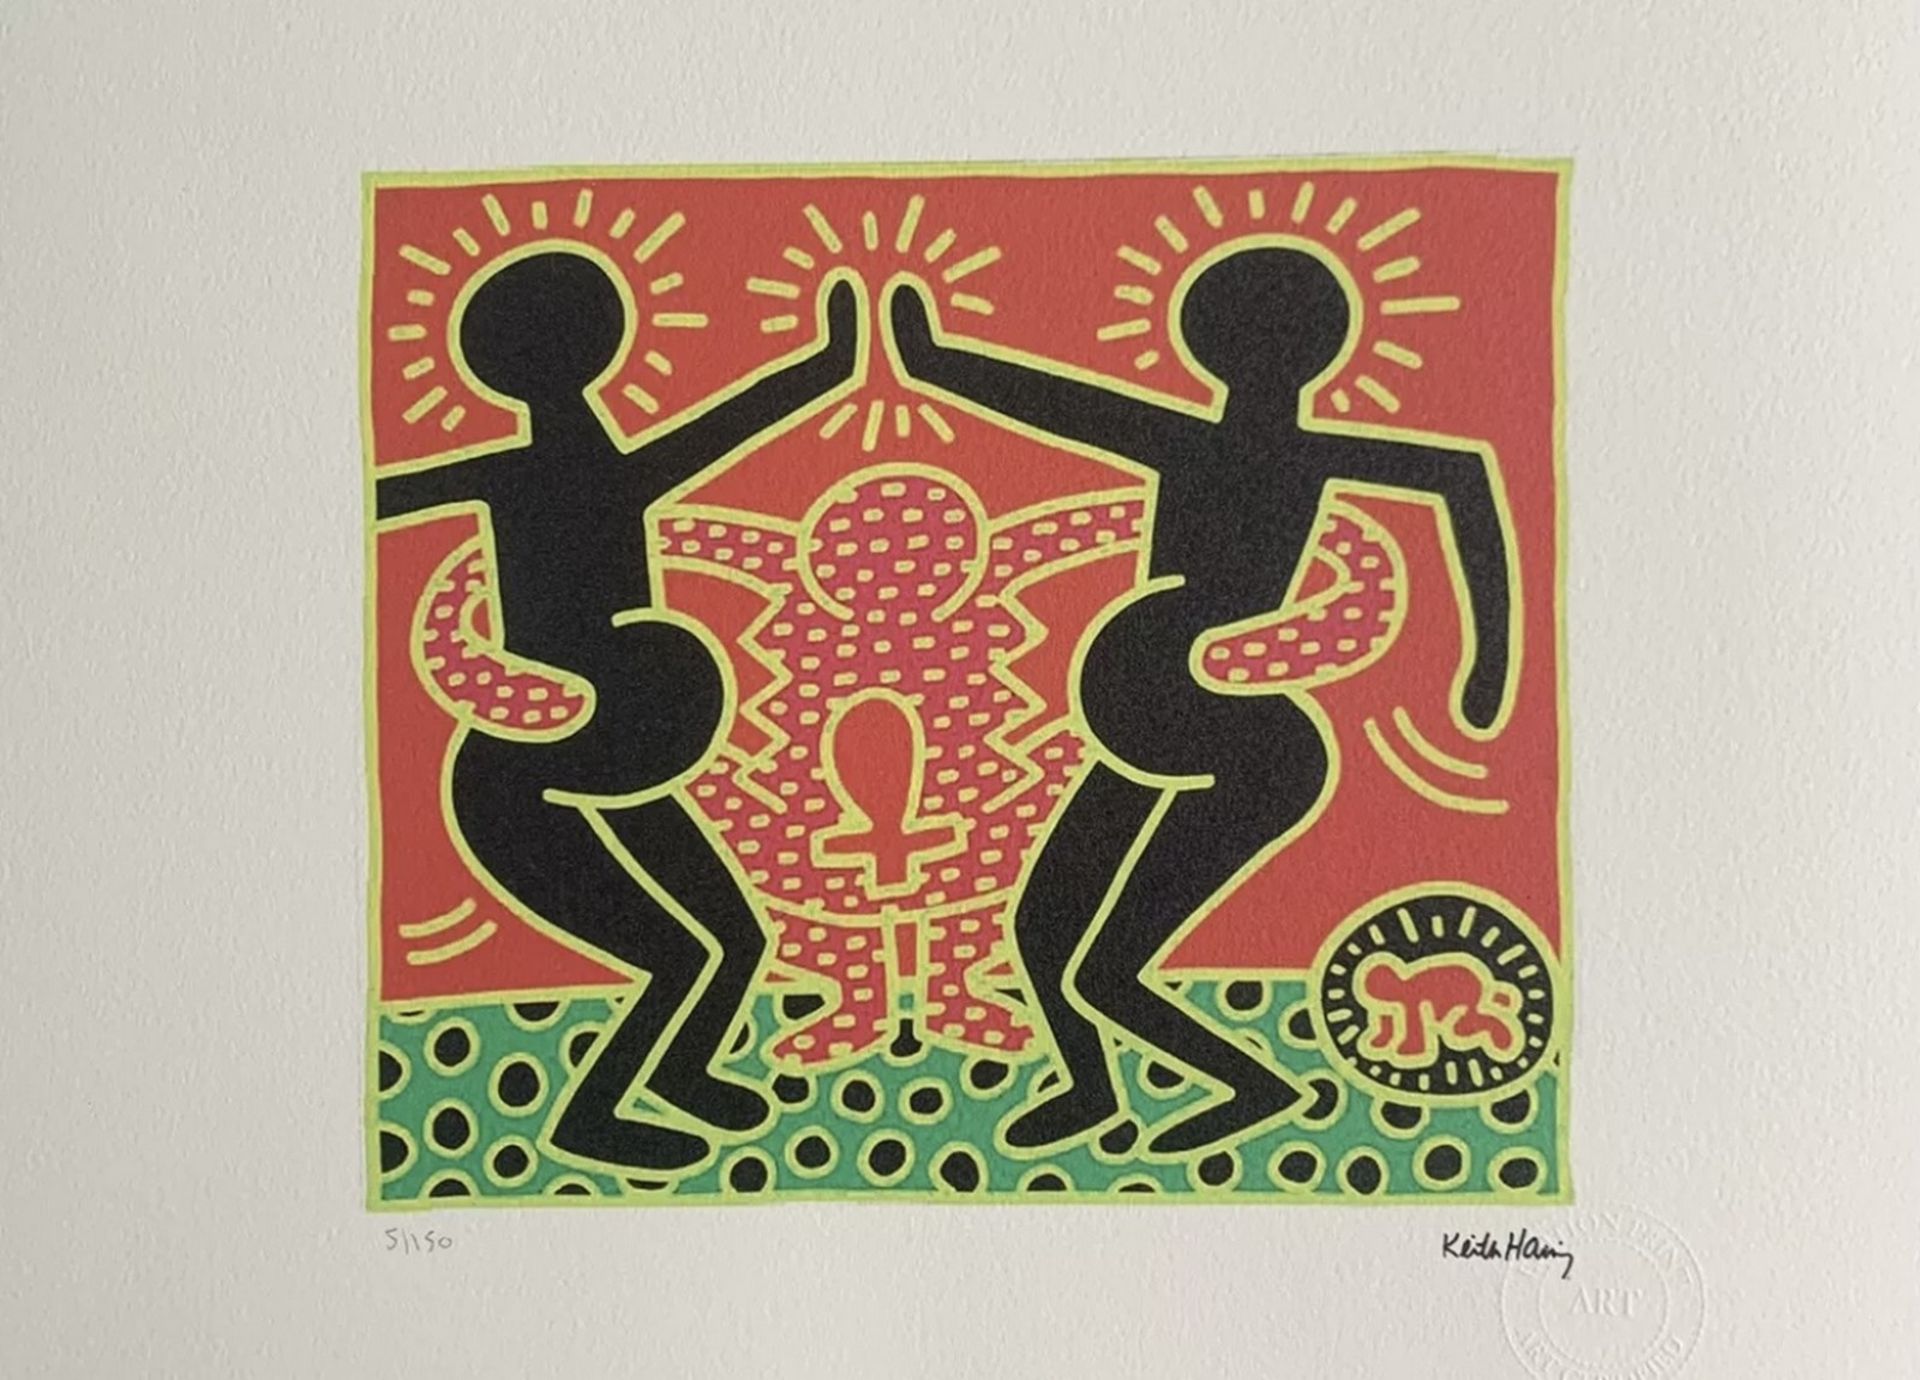 KEITH HARING, AFTER